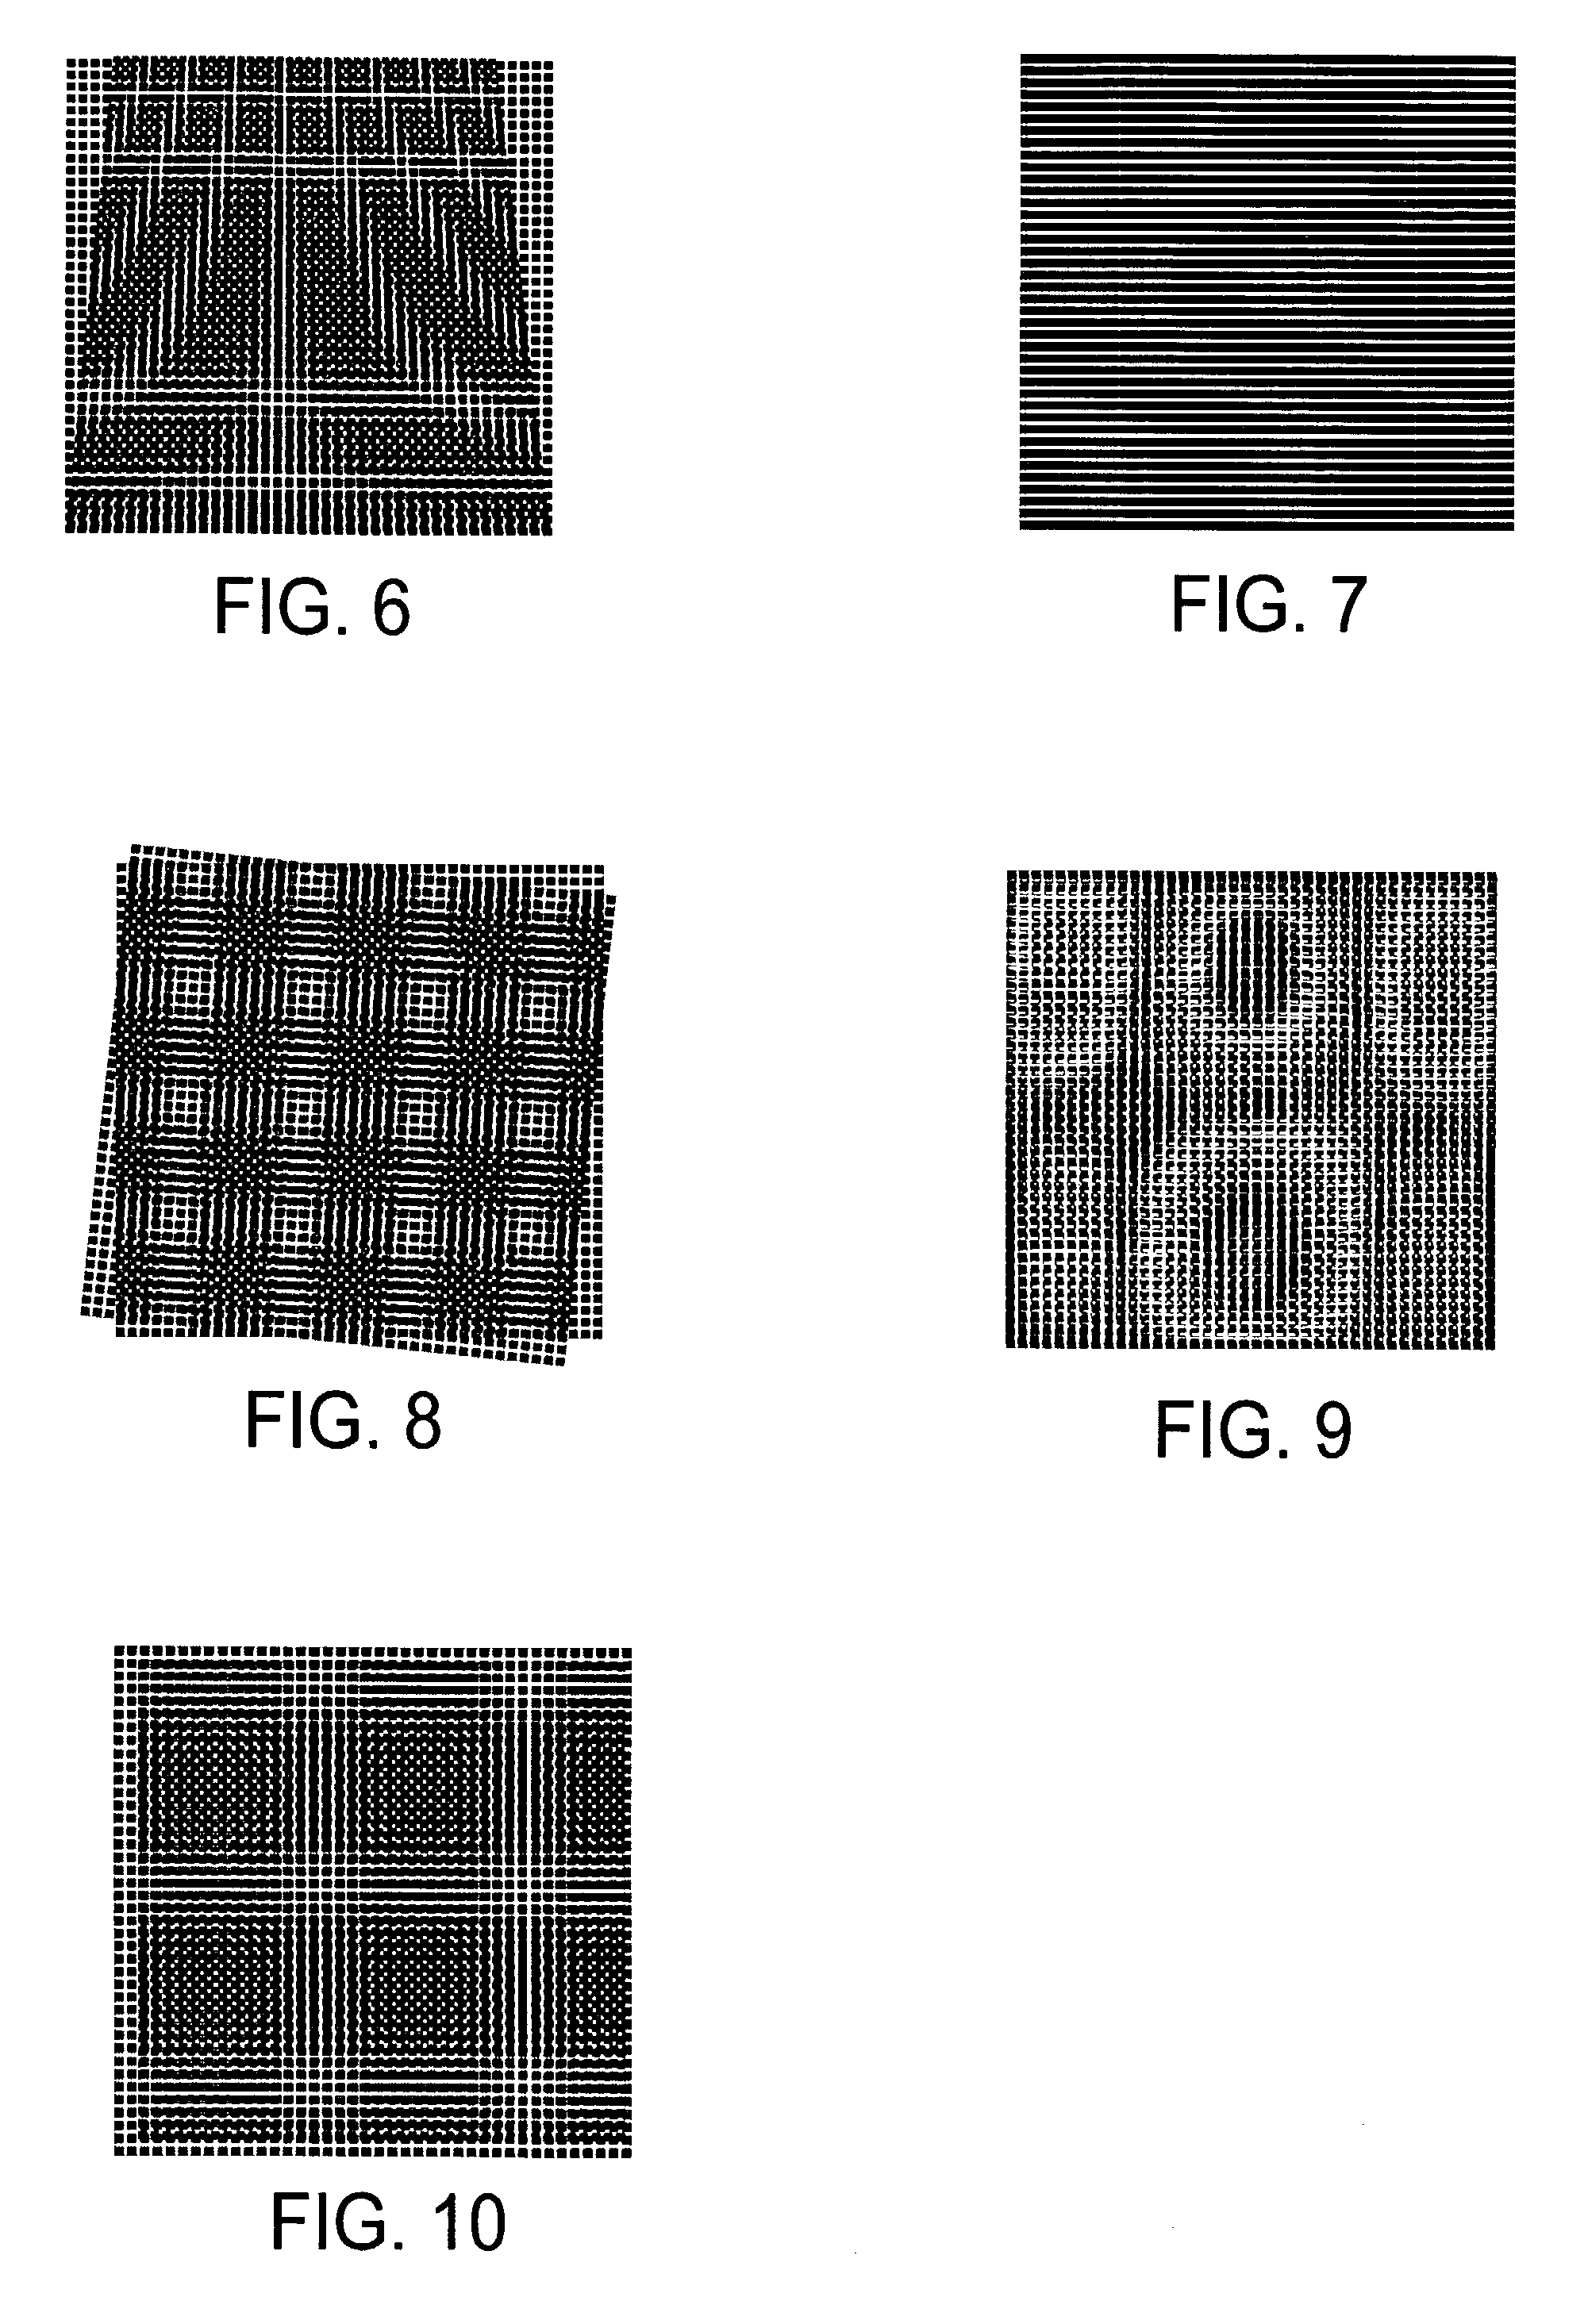 Prepatterned substrate for optical synthesis of DNA probes